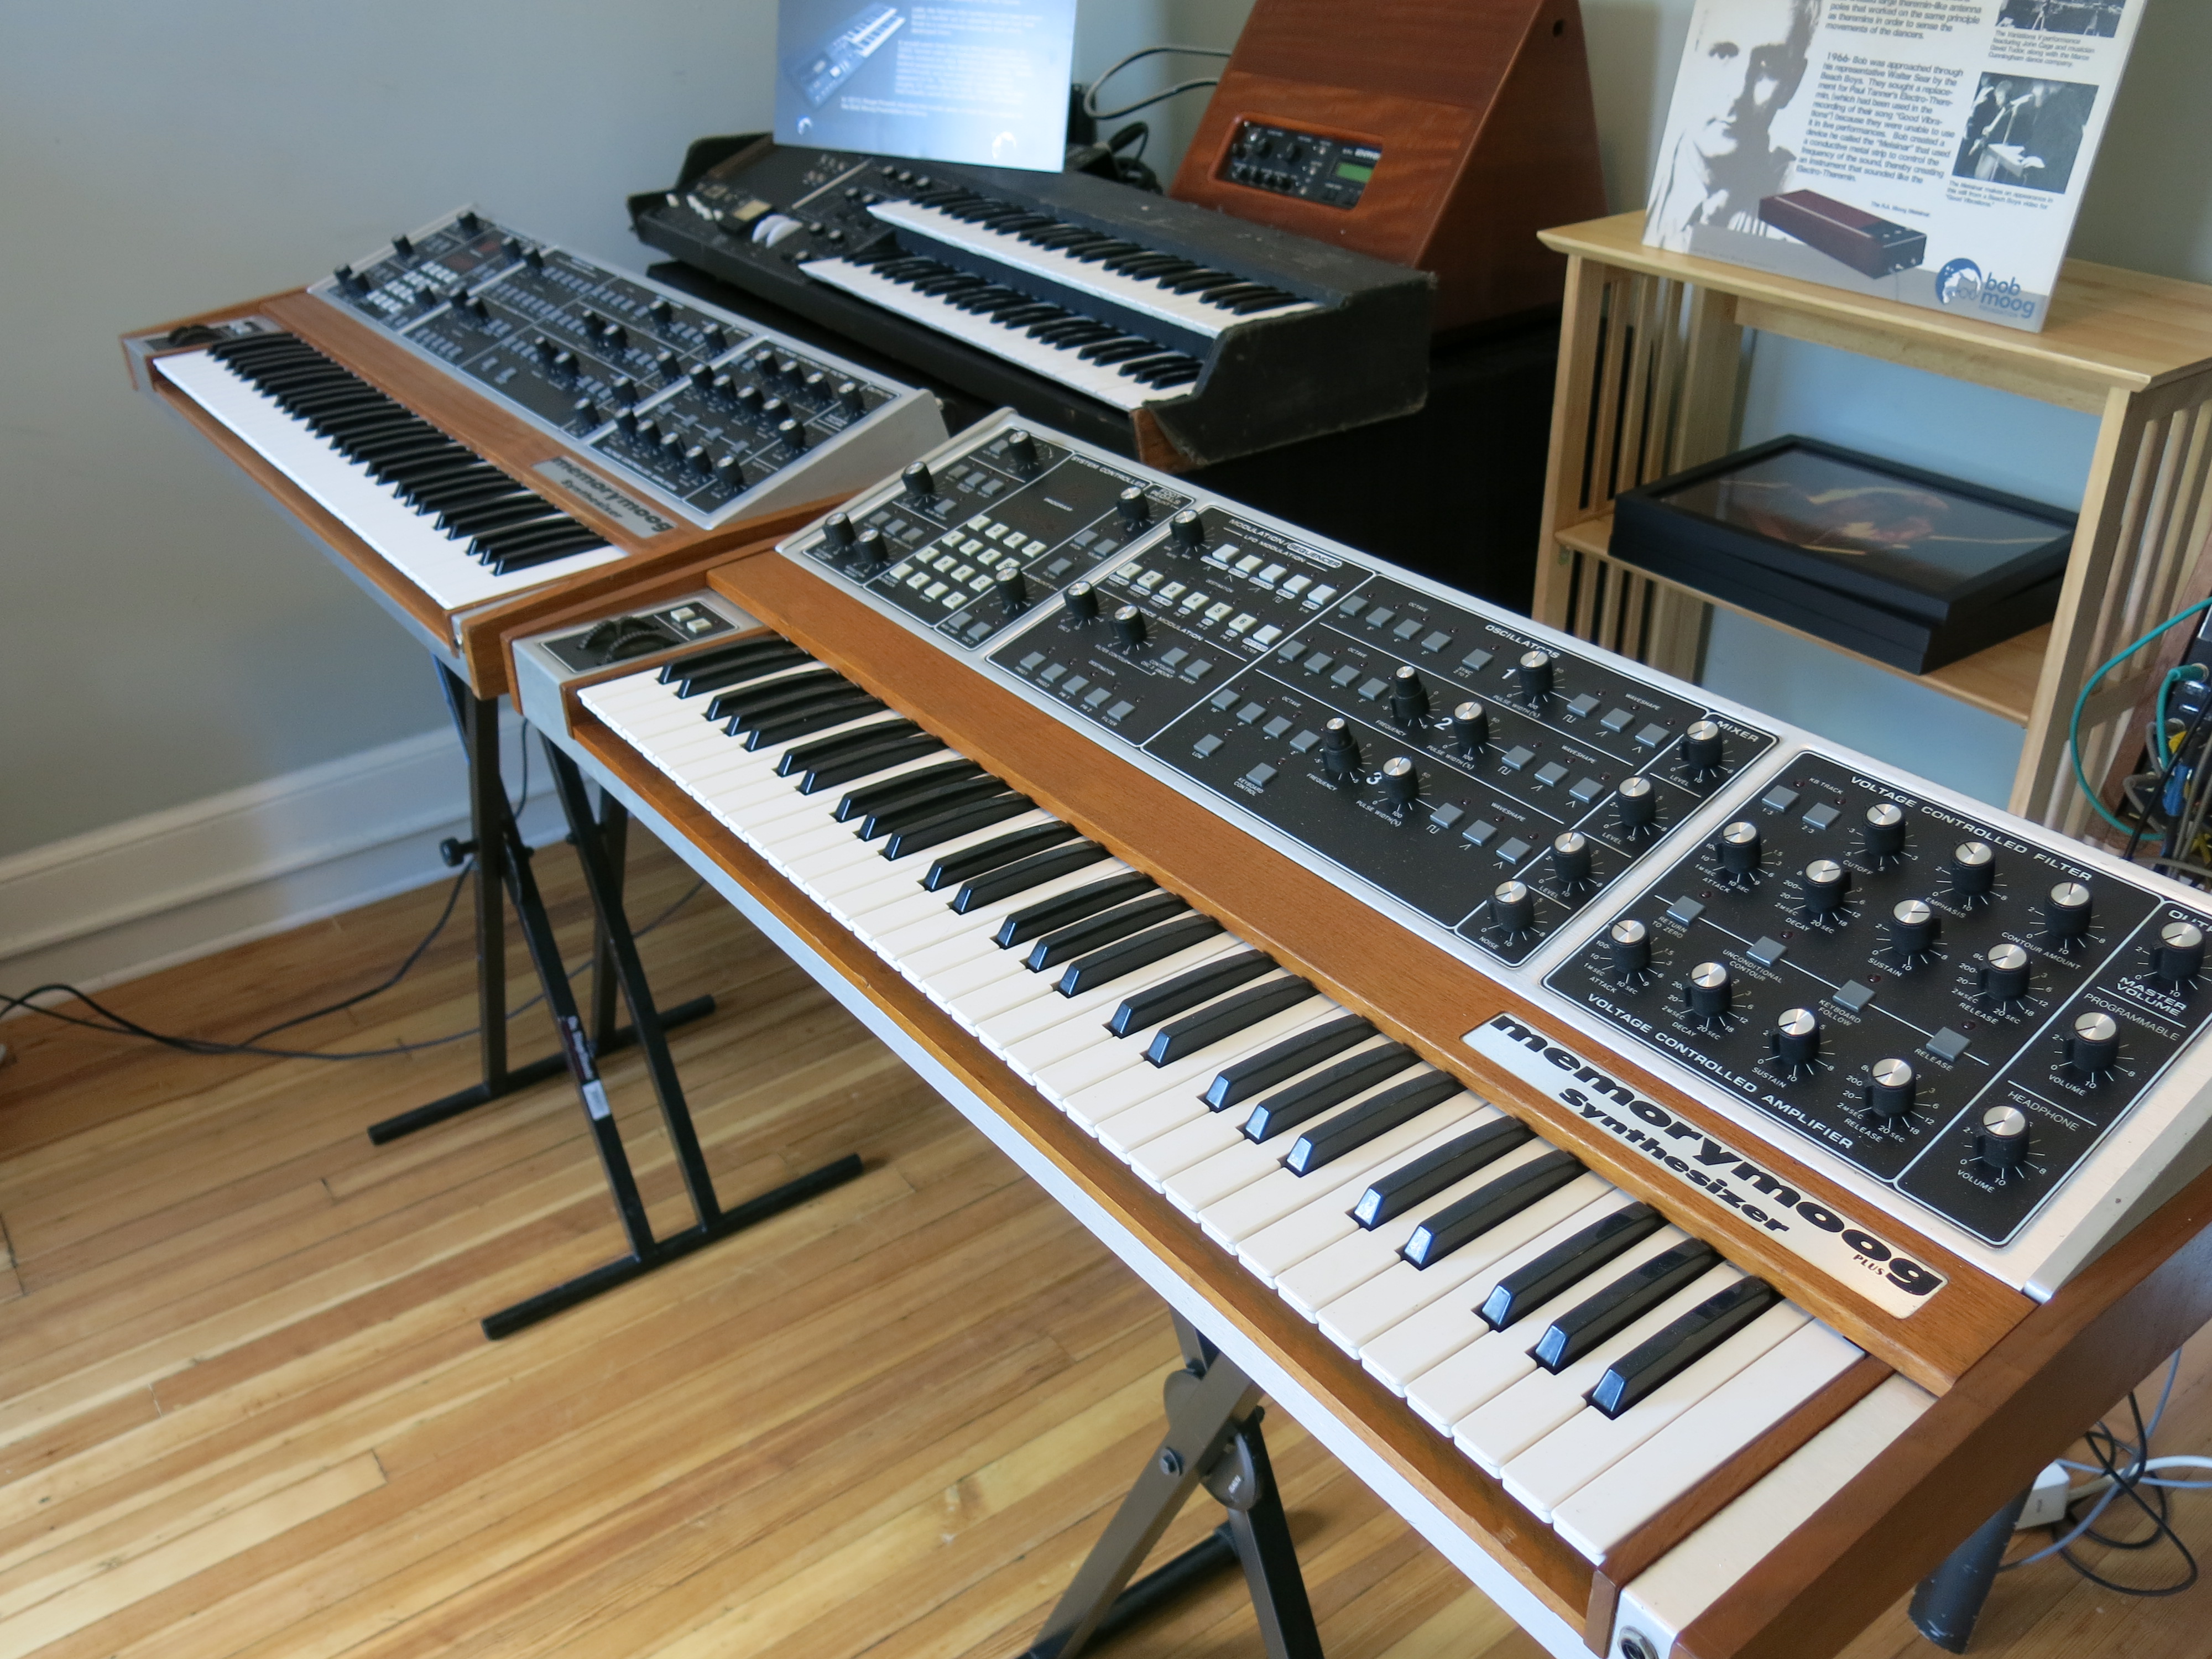 Wes Taggart’s Journey to Restoring the Memorymoog Plus